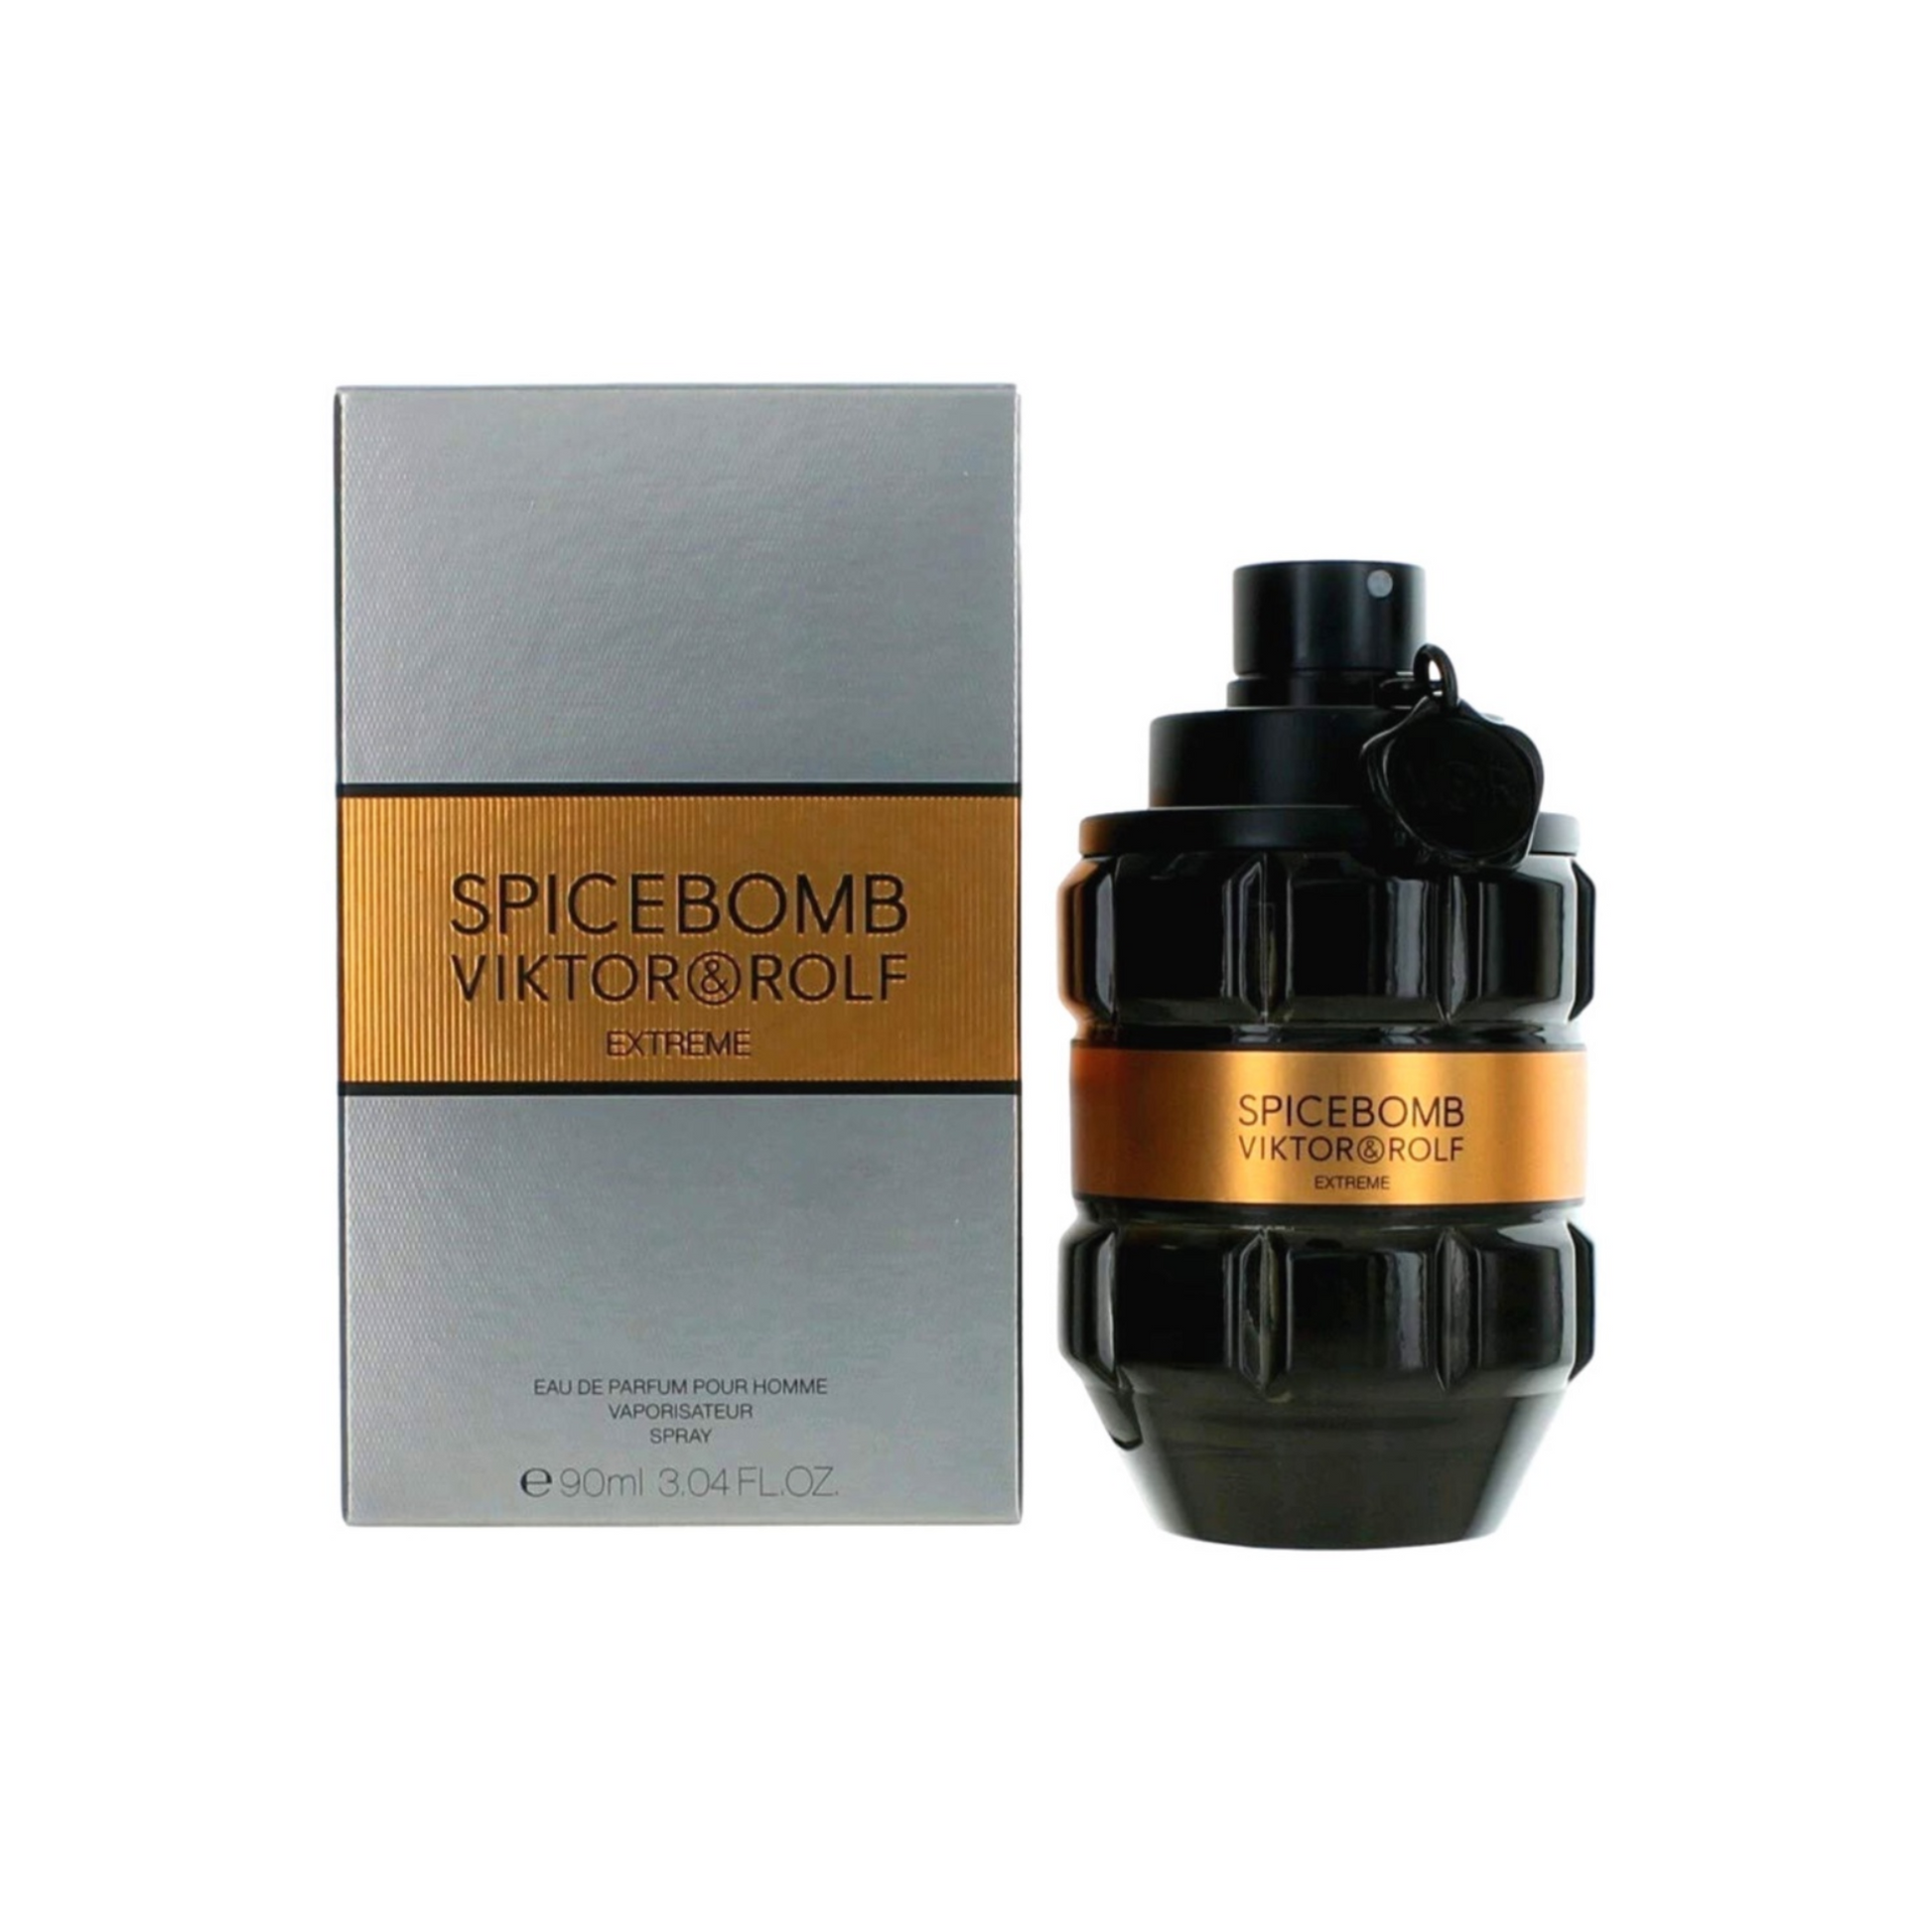 spicebomb cologne extreme